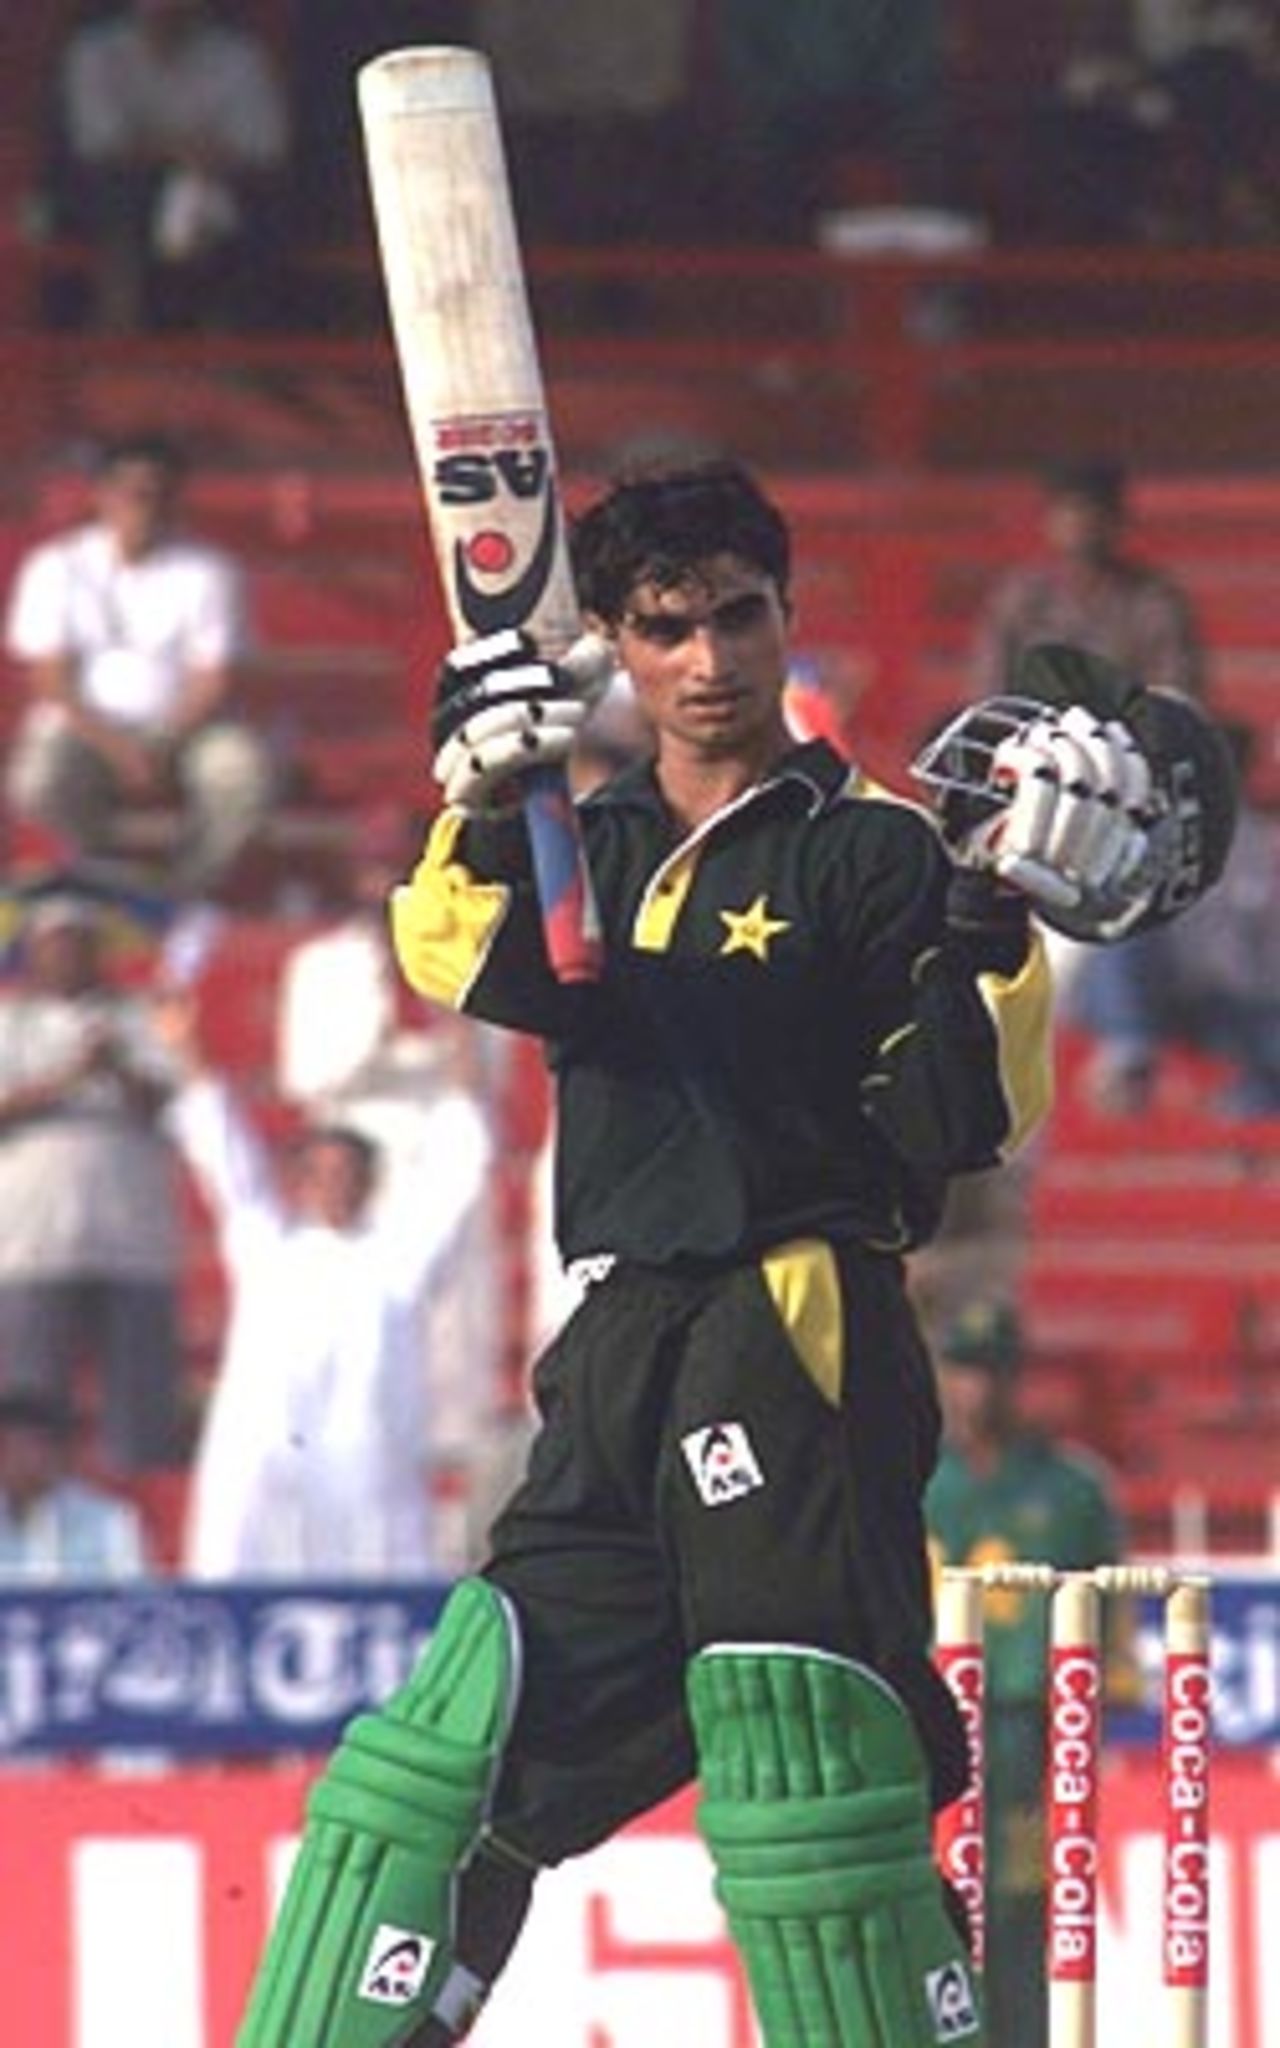 Imran Nazir waves to the crowds after reaching the half-century mark, Pakistan v South Africa, Coca-Cola Cup 1999/00, C.A. Stadium Sharjah, 24 March 2000.